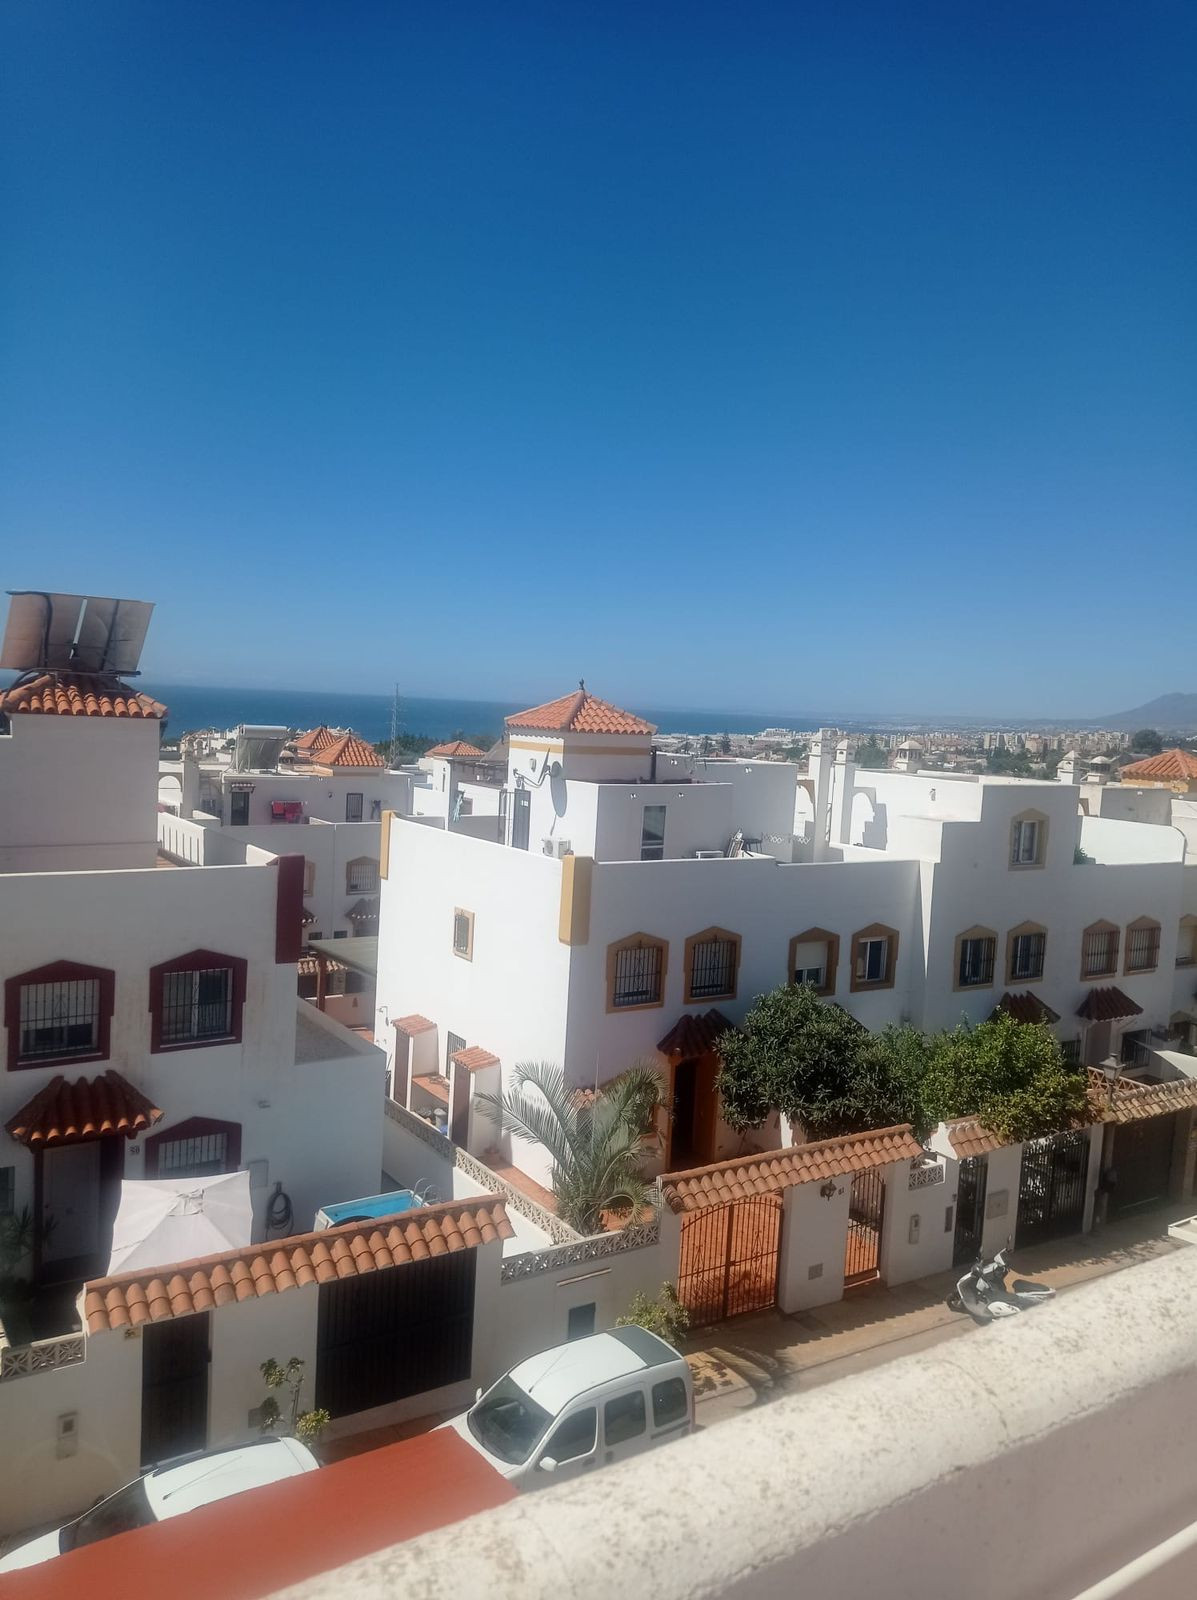 Beautiful townhouse with four bedrooms and three bathrooms in a quiet residential area of ??Marbella, Spain